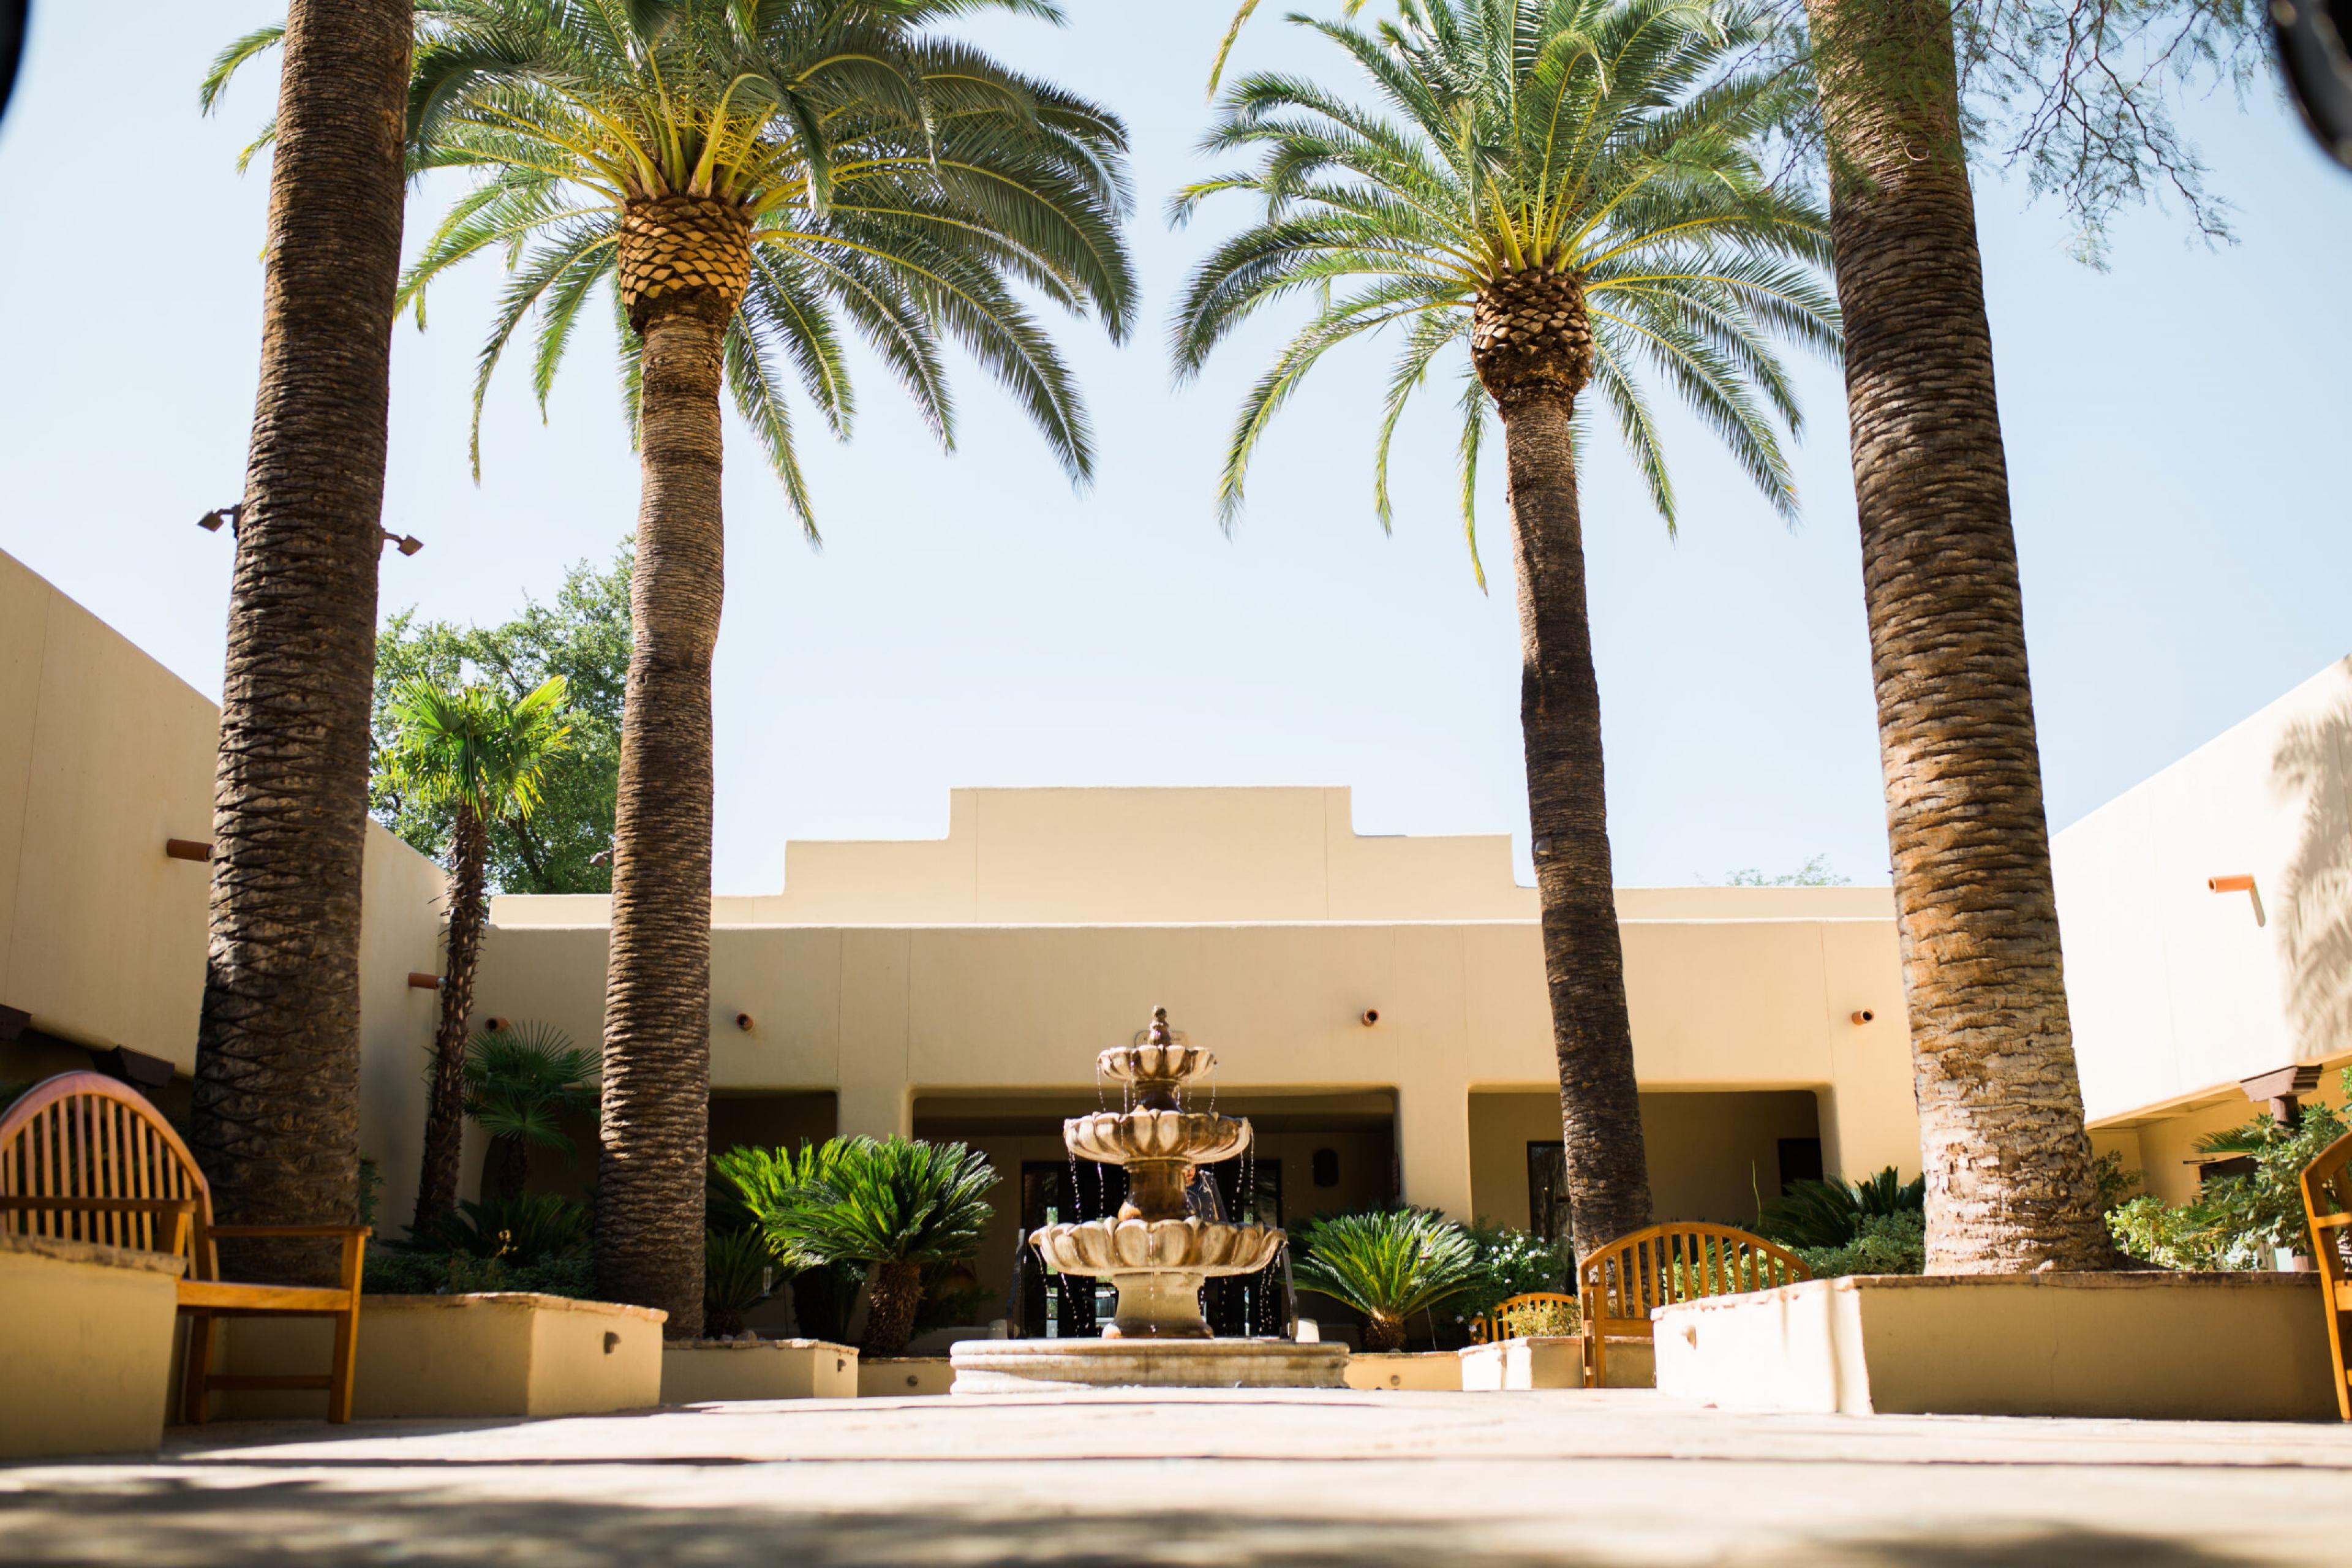 The entrance of Miraval is white adobe with two large palm frees framing the front door. There is a fountain in the middle of the courtyard.